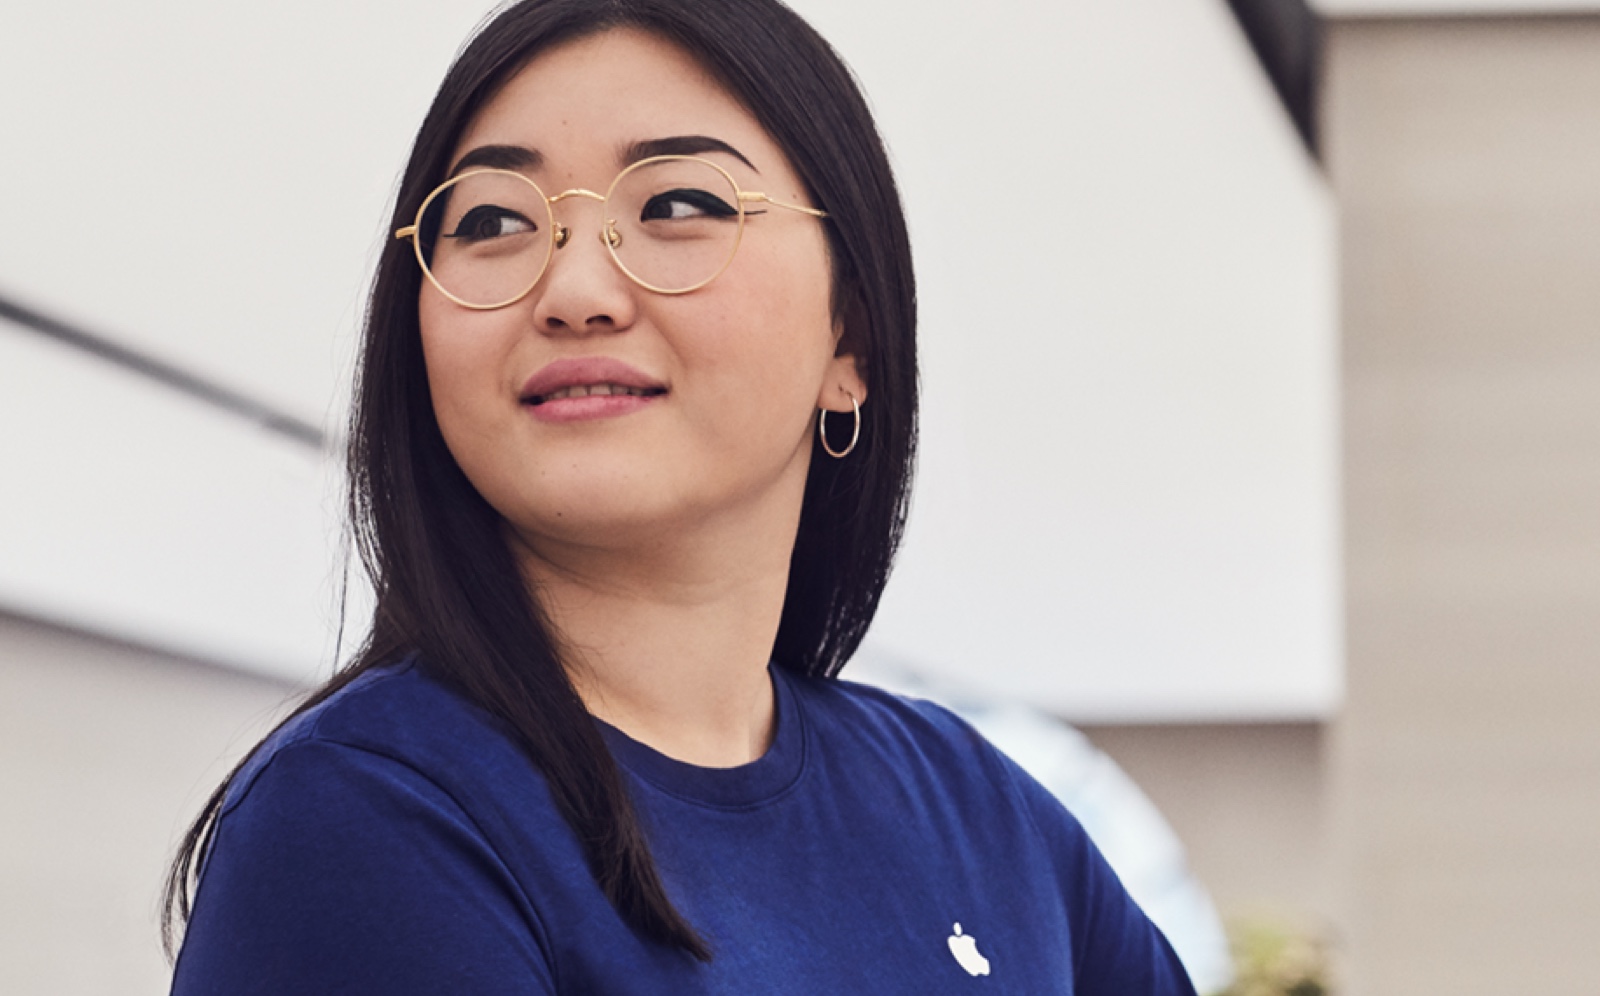 A female Apple Store employee stands in the store, smiling.